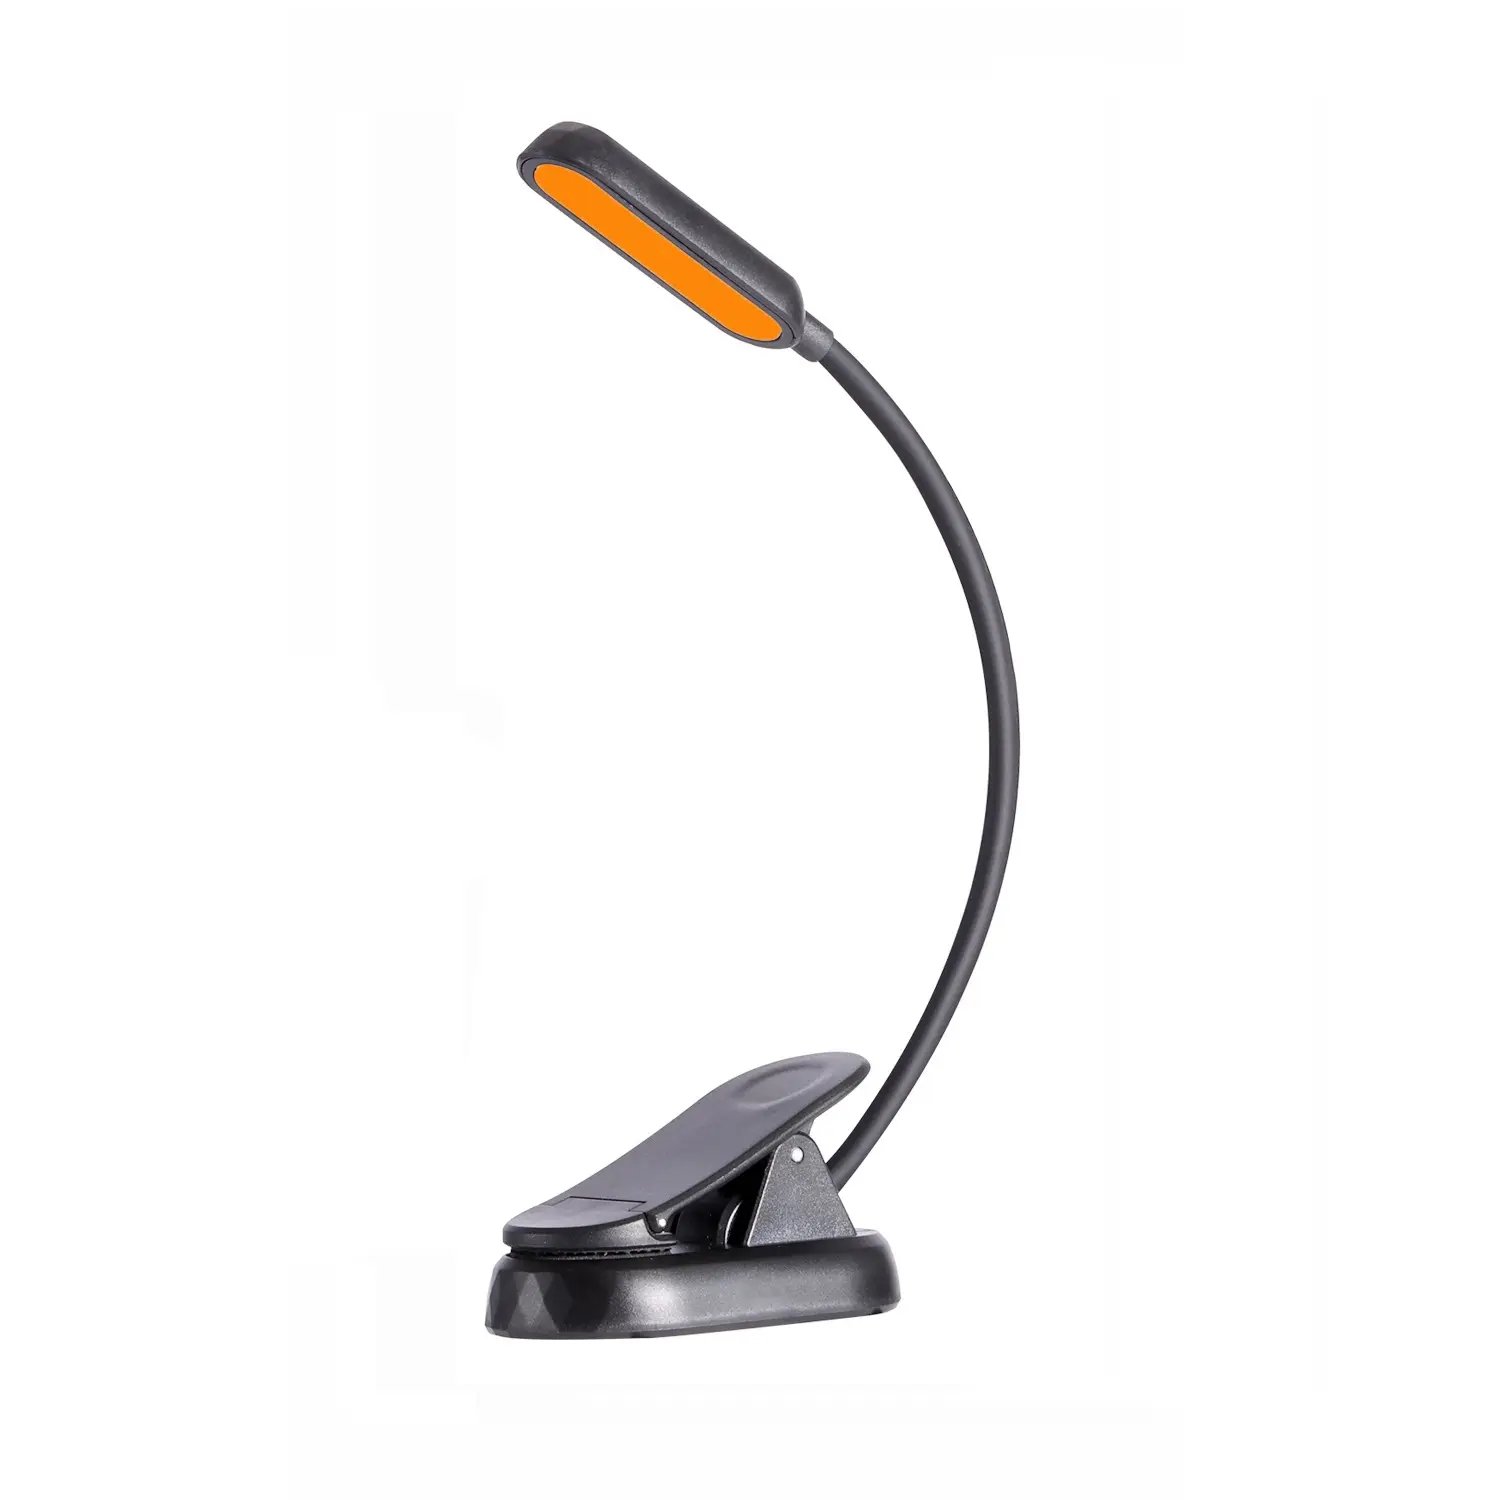 Clip on 7 Leds 3 Level Dimming Modern Rechargeable Bedside Table Lamp for Reading at Night